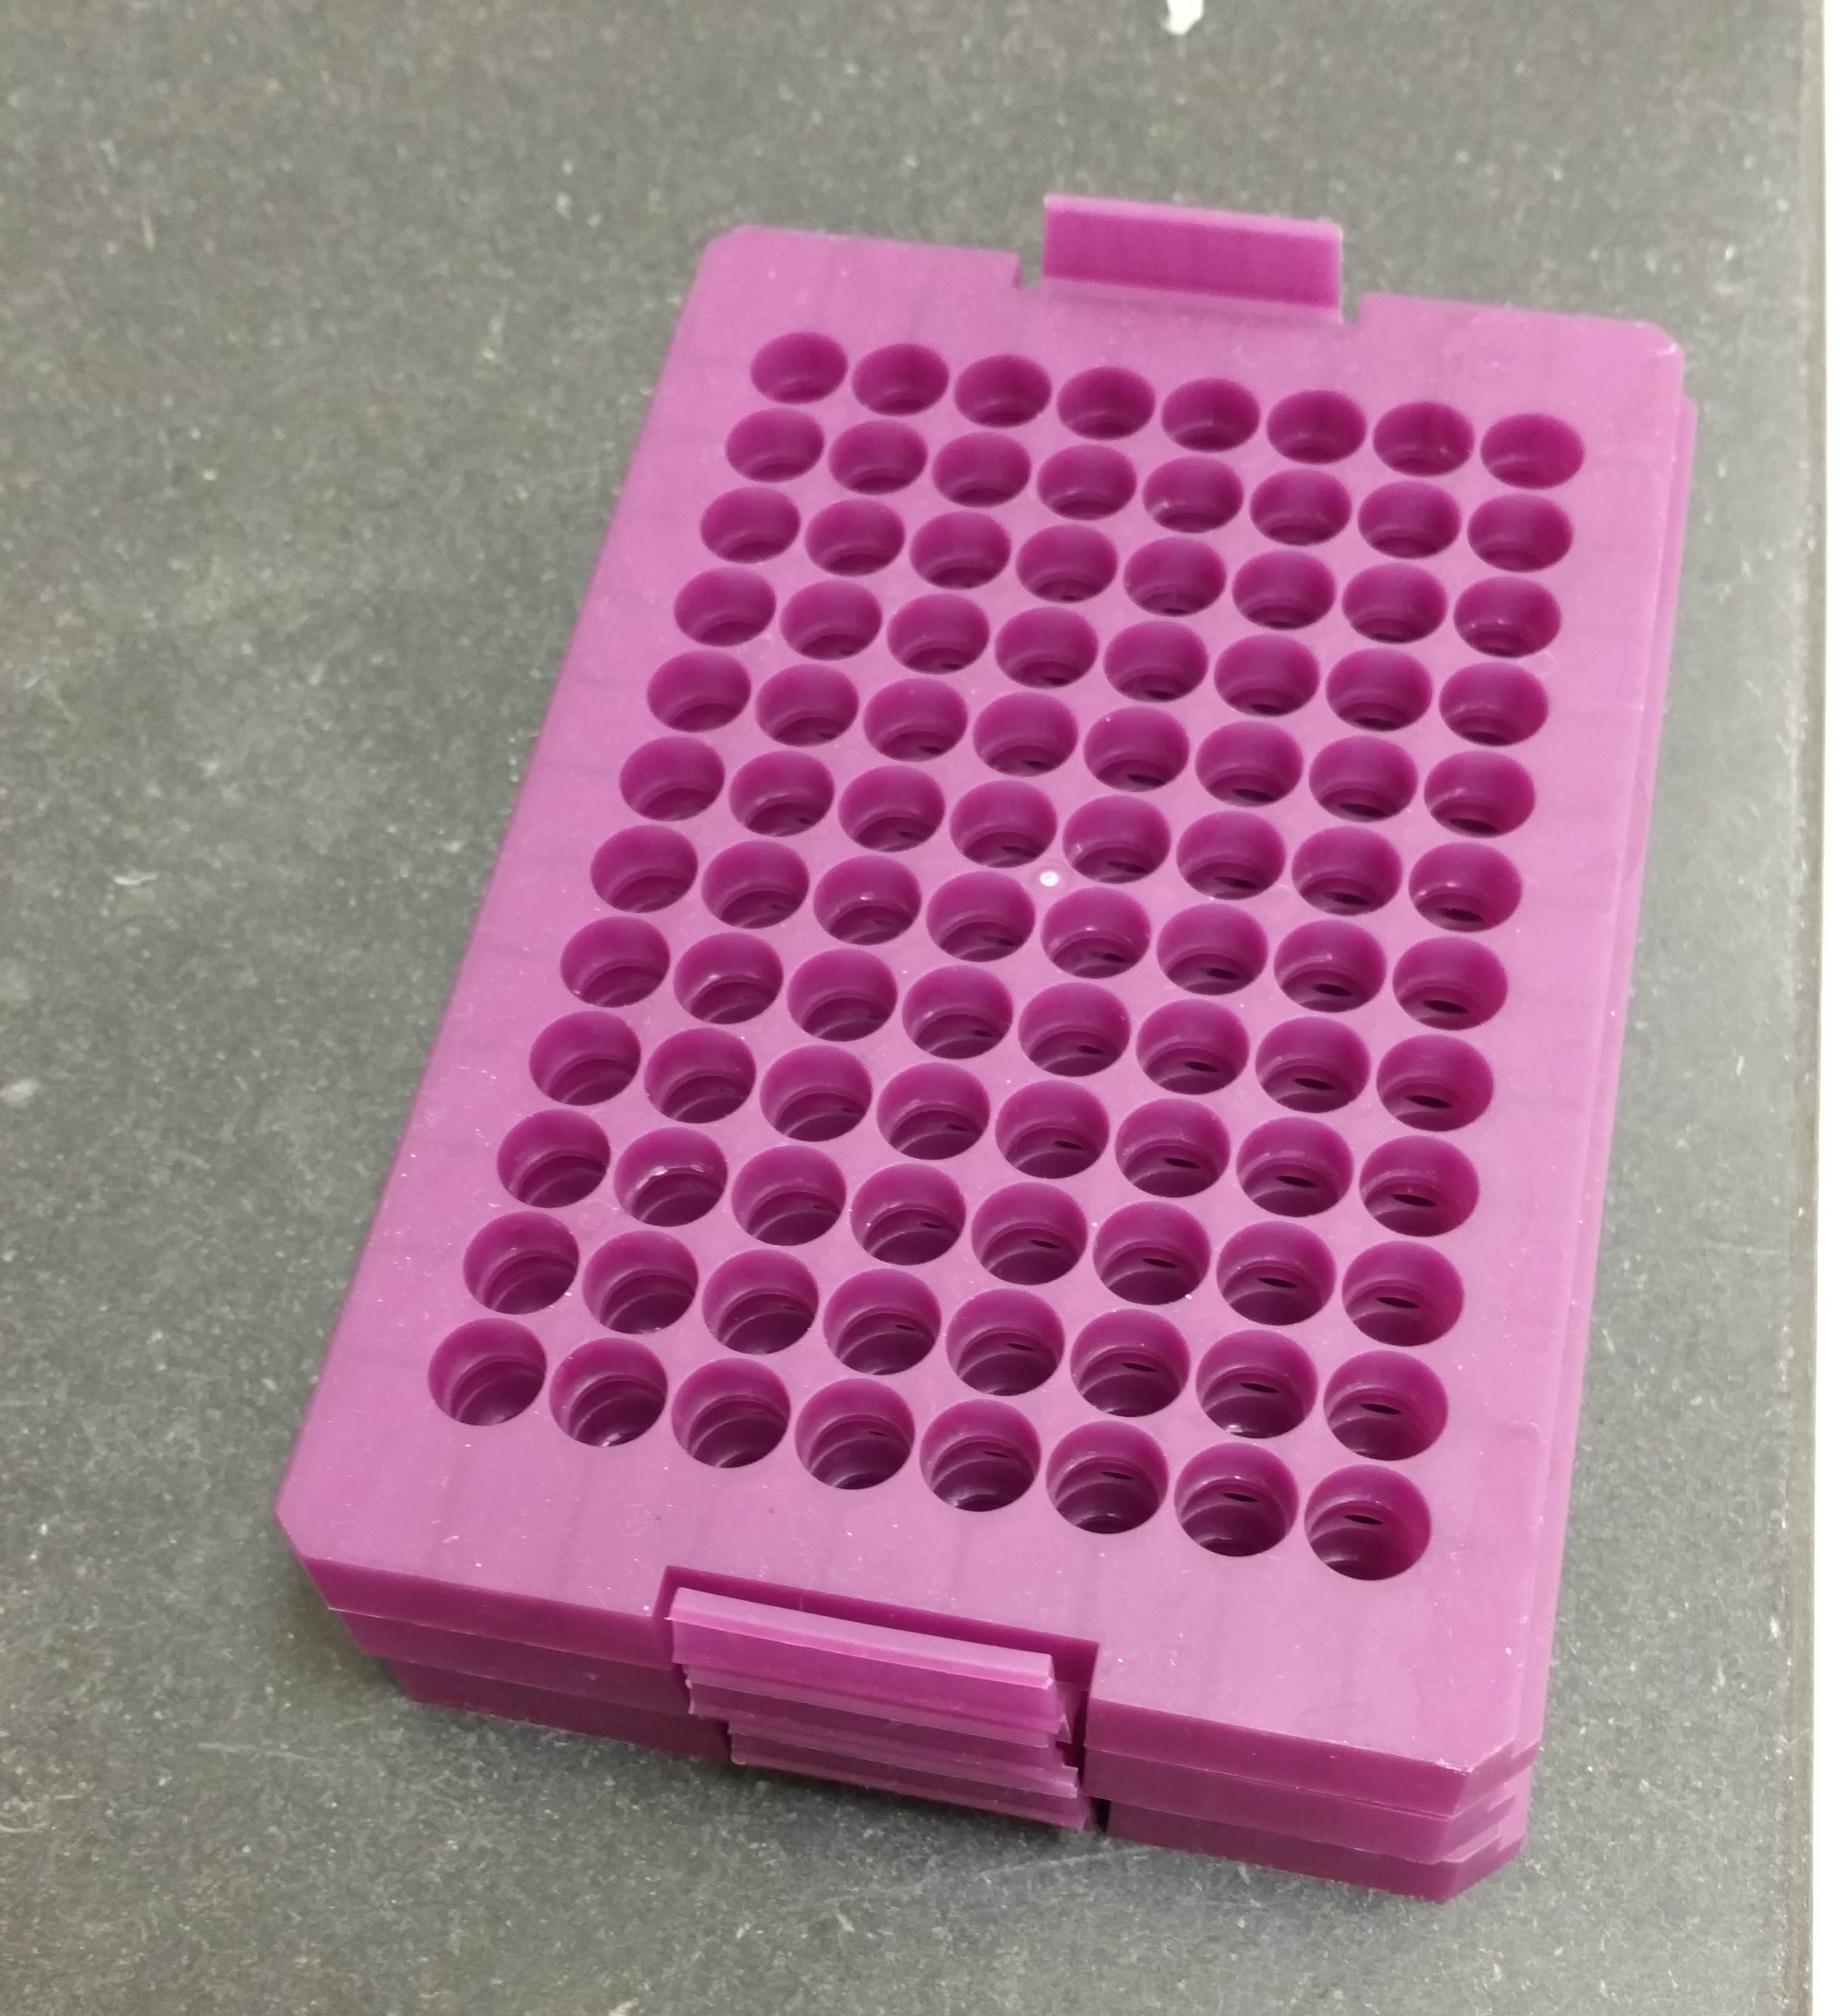 25 Real Lab Hacks from Researchers Like You - Double stack pipette holders and use those as a PCR tube rack